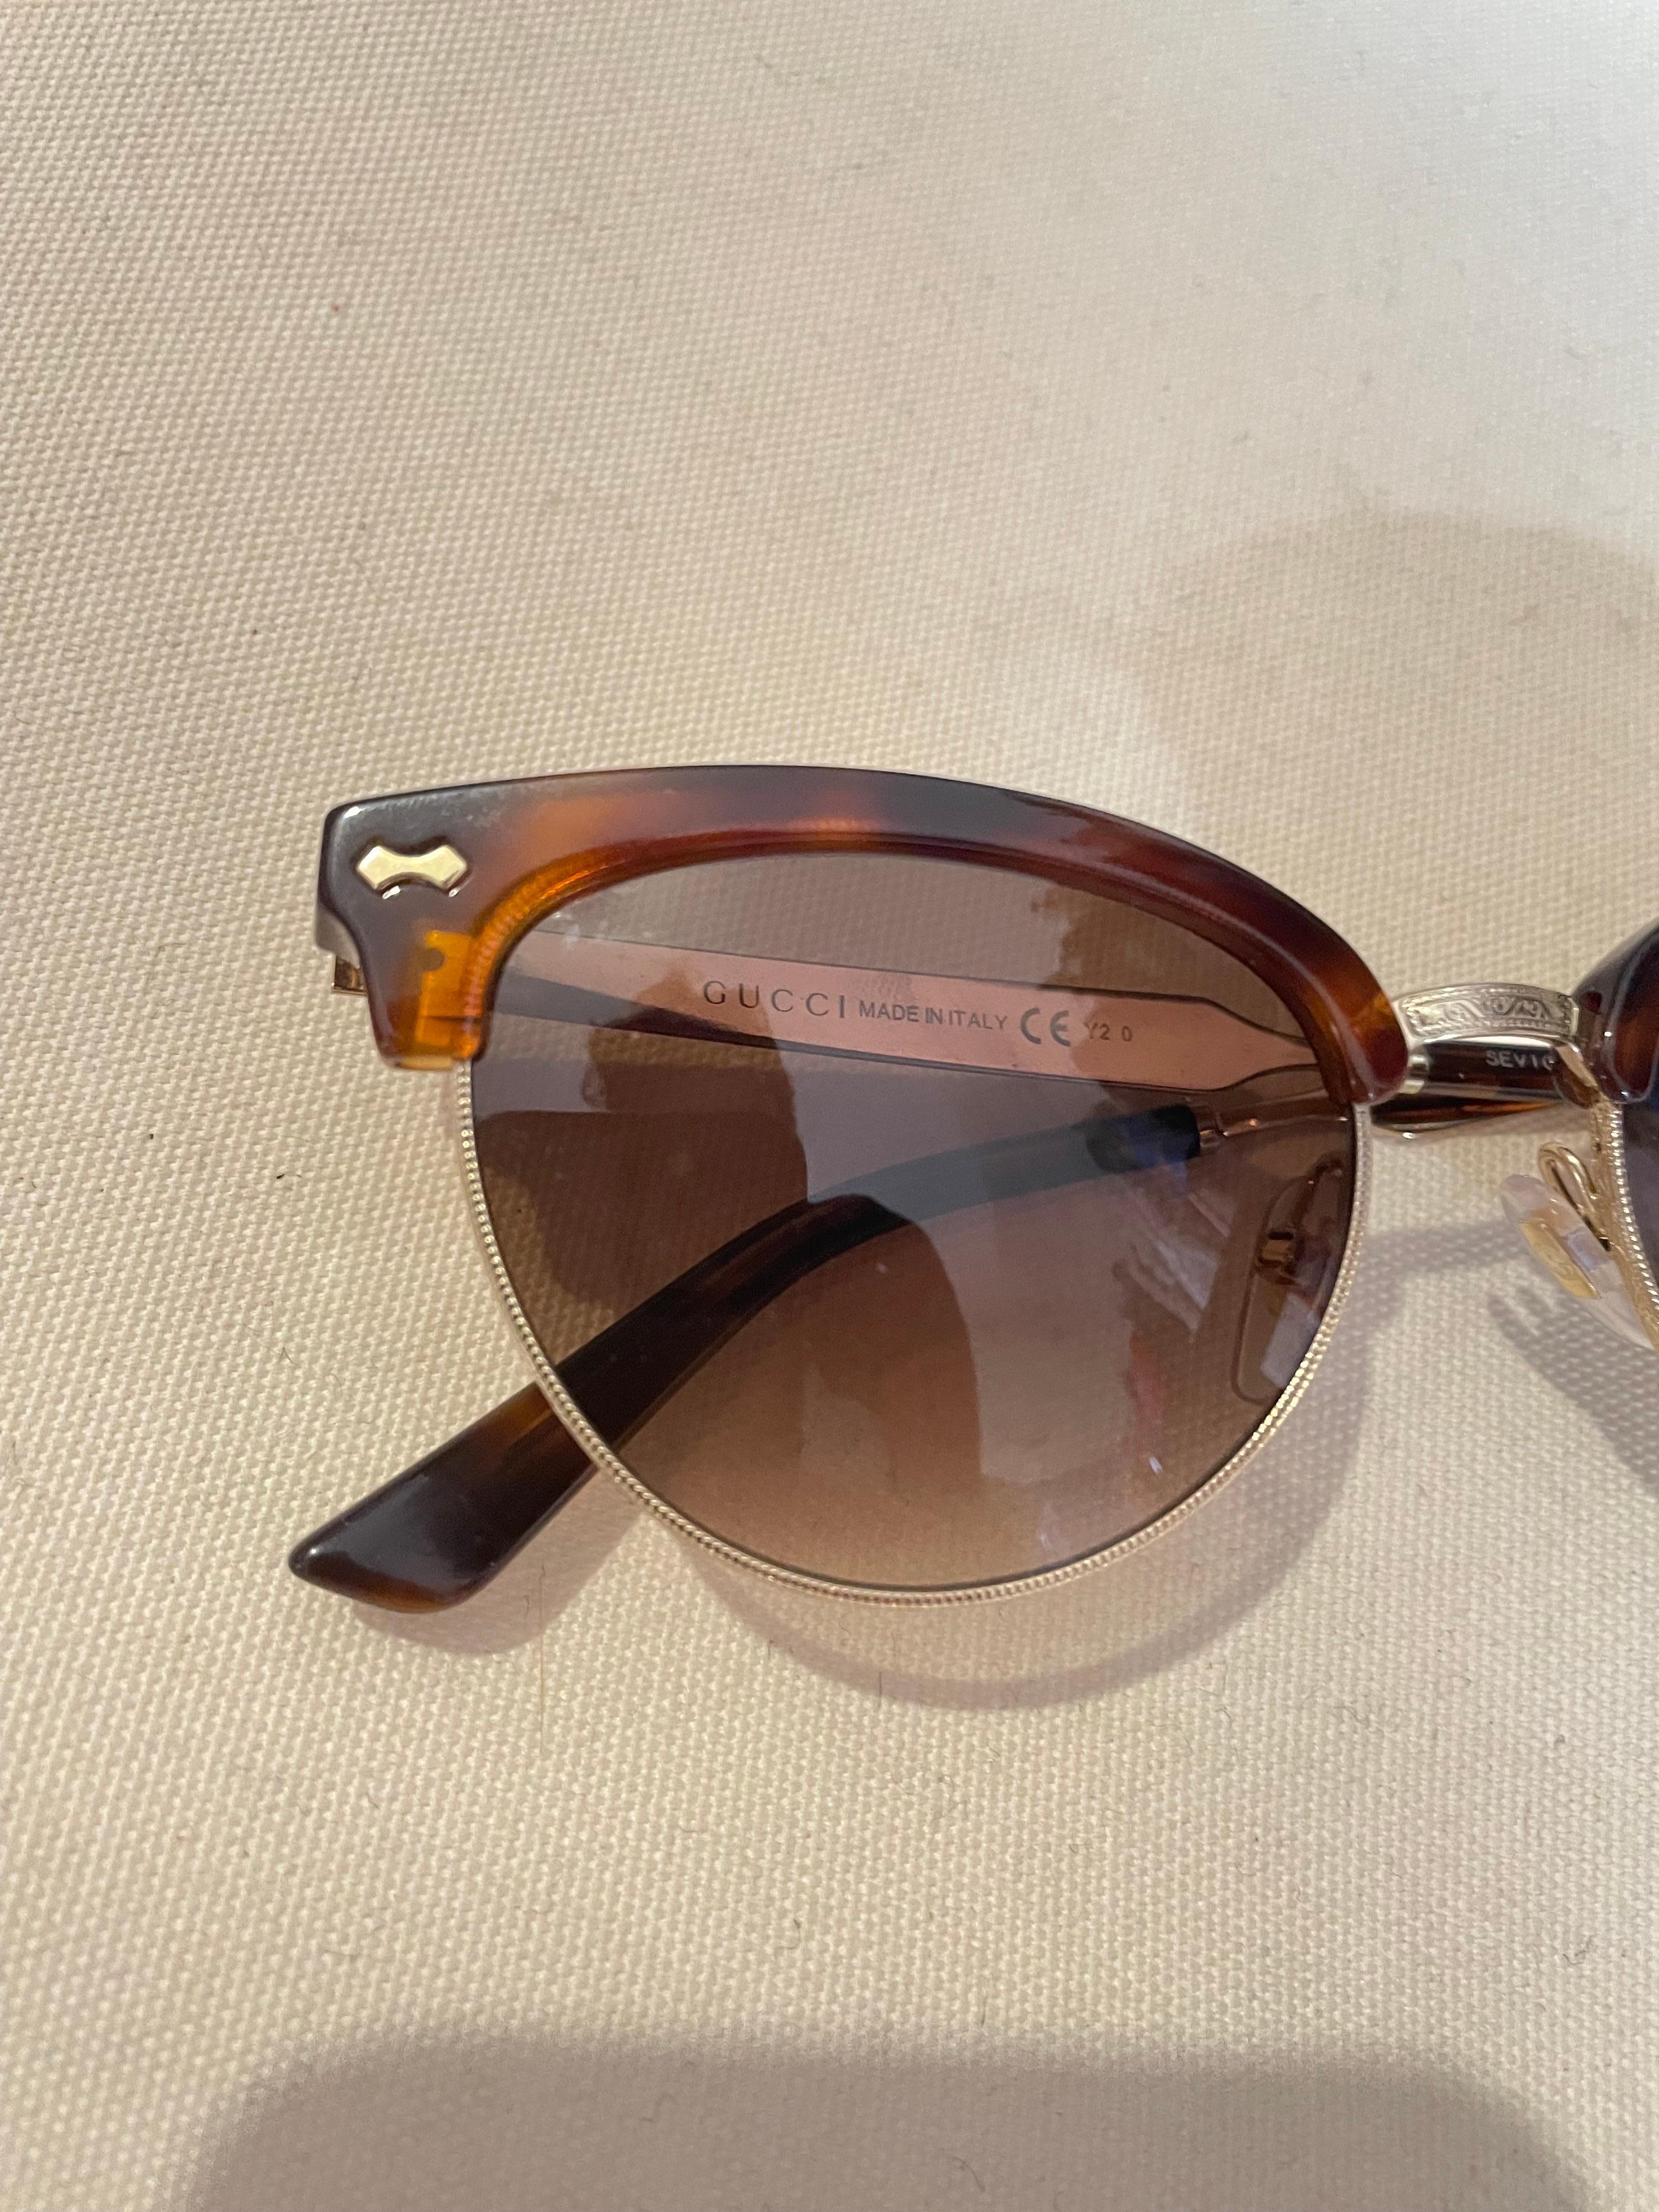 Vintage Gucci glasses, in shades of brown. The lenses have just been replaced by an optician. Plastic frame with metal temples. Width 13.5 cm, height 4.5 cm and temples 13 cm.